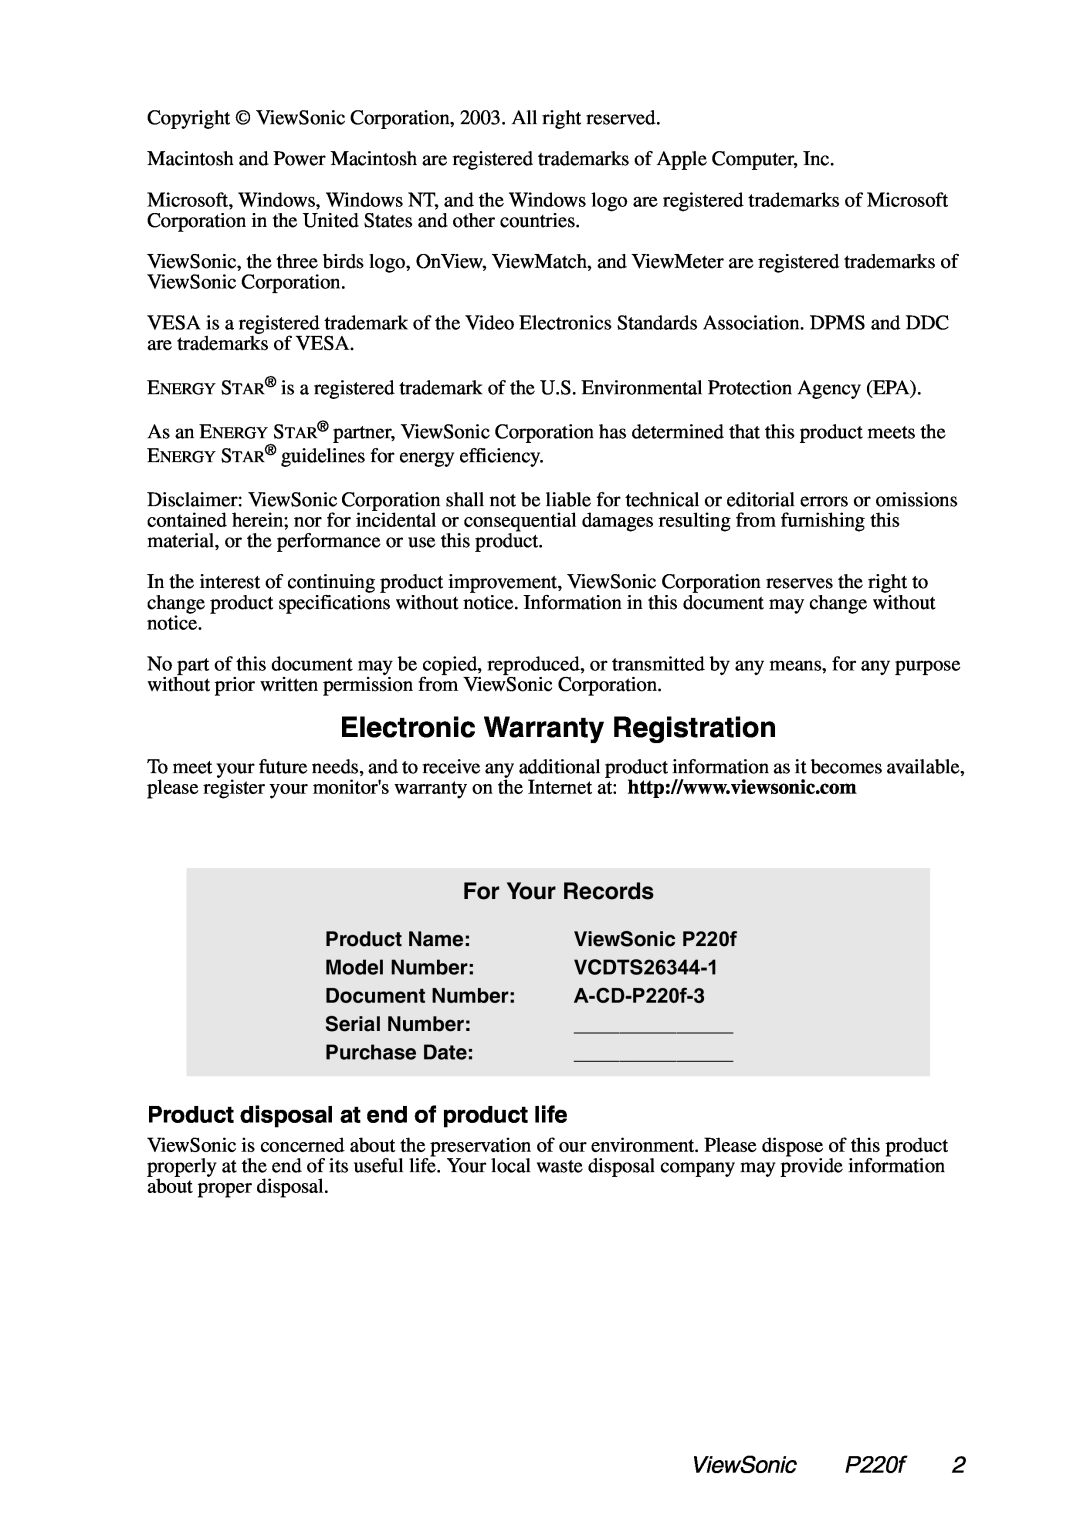 ViewSonic P220f Electronic Warranty Registration, For Your Records, Product disposal at end of product life, Product Name 